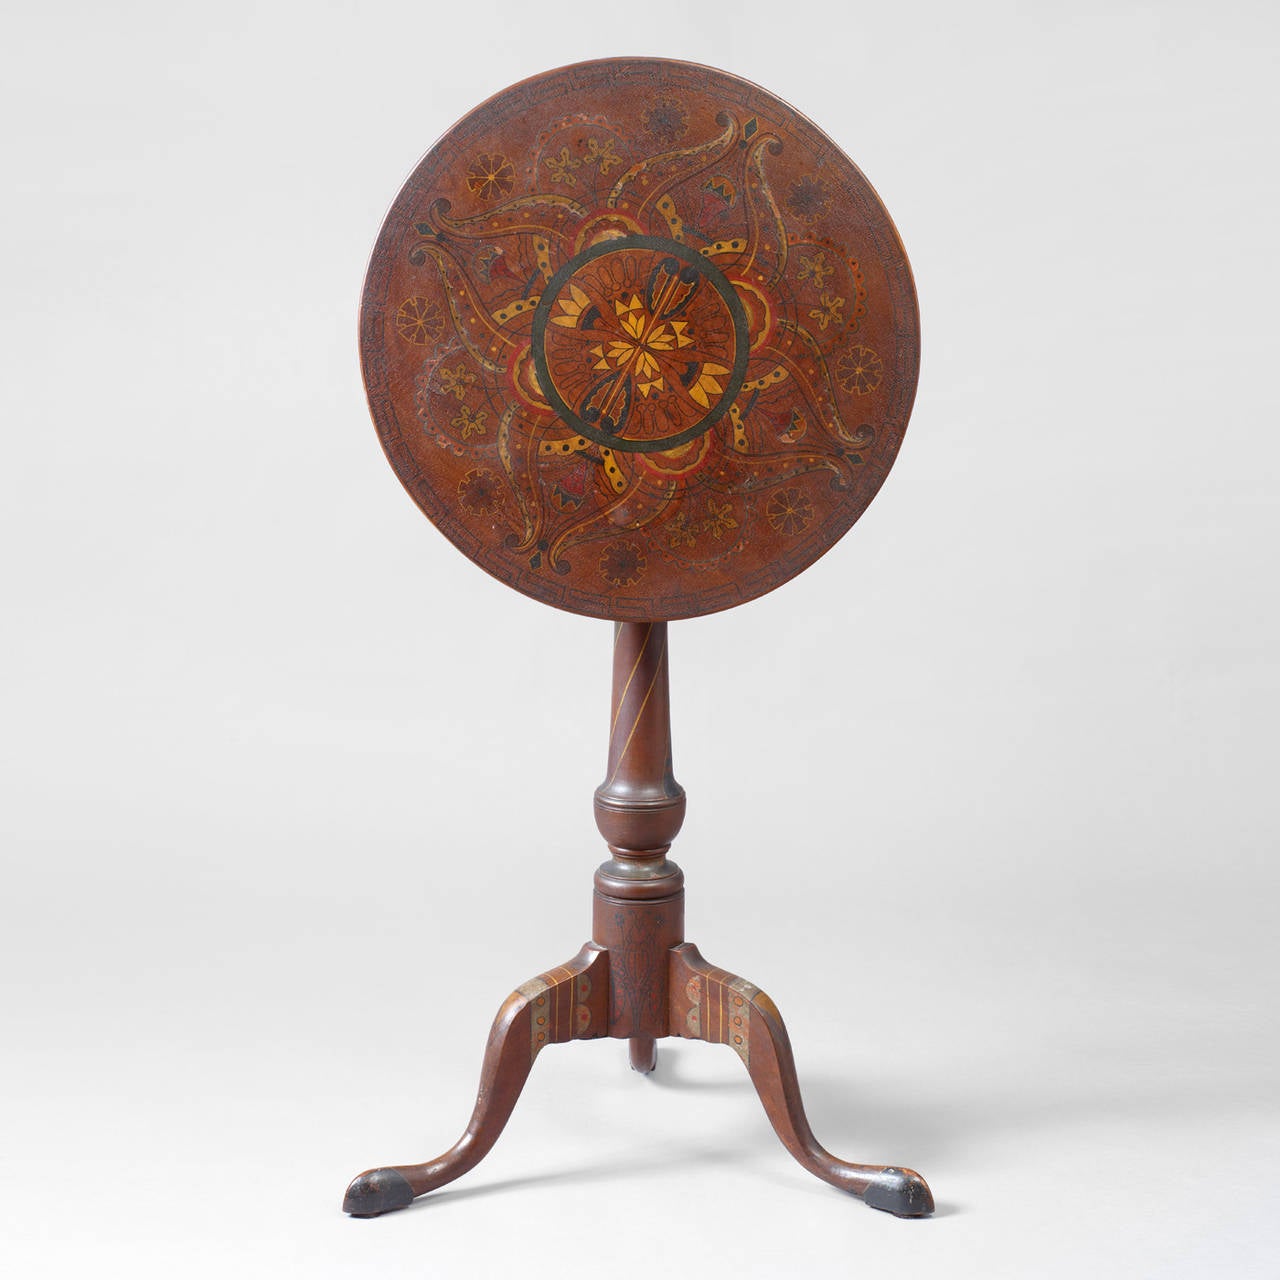 America. Pennsylvania, circa 1770. Paint decoration, 19th century.
Walnut, polychrome paint decoration.
Condition: The candlestand is in fine condition, minor losses to some of the paint decoration on the top.

Very seldomly do we see the